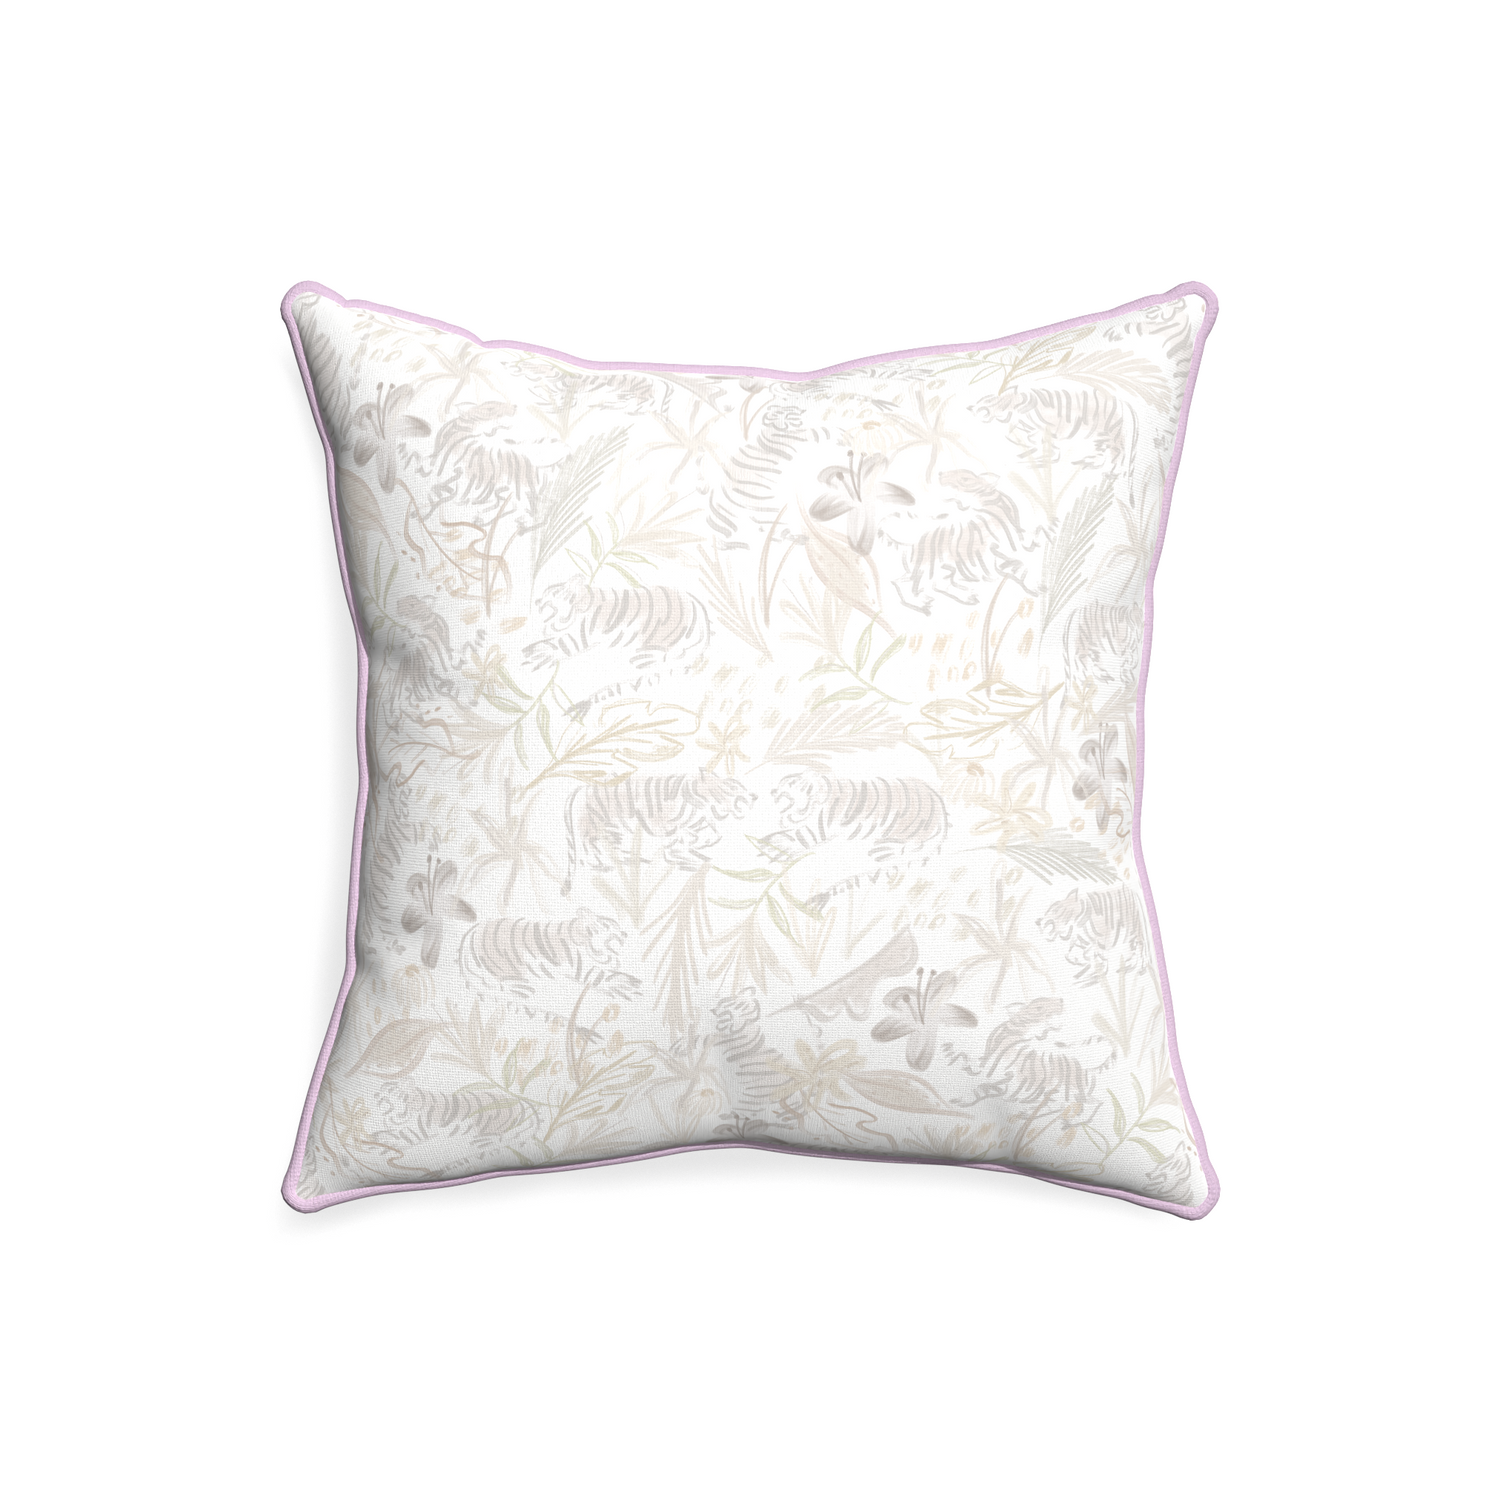 20-square frida sand custom beige chinoiserie tigerpillow with l piping on white background